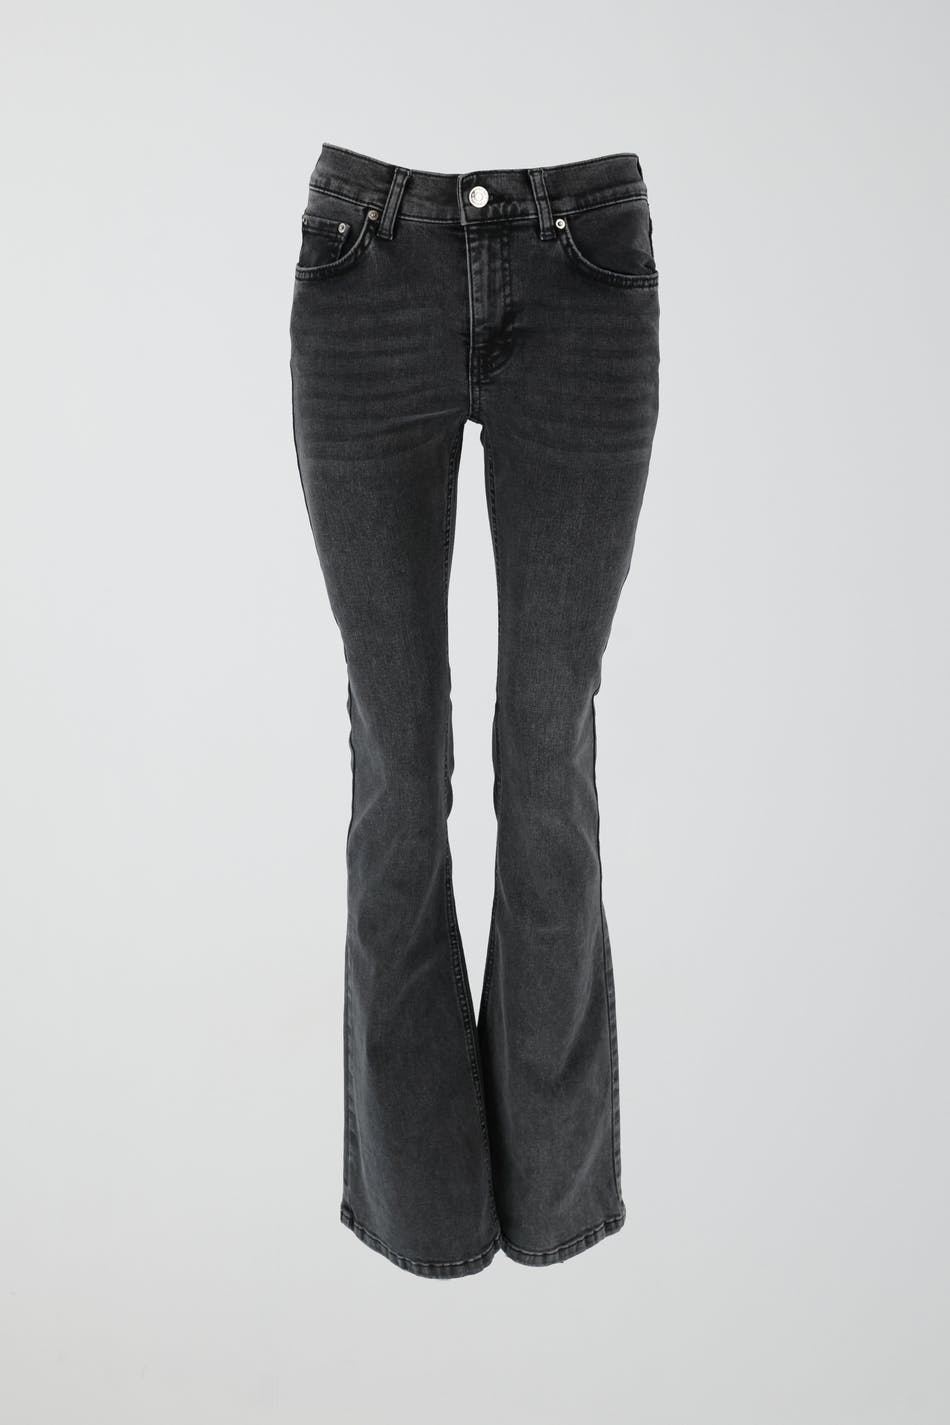 Gina Tricot - Low waist tall bootcut jeans - flare & wide jeans - Grey - 34 - Female